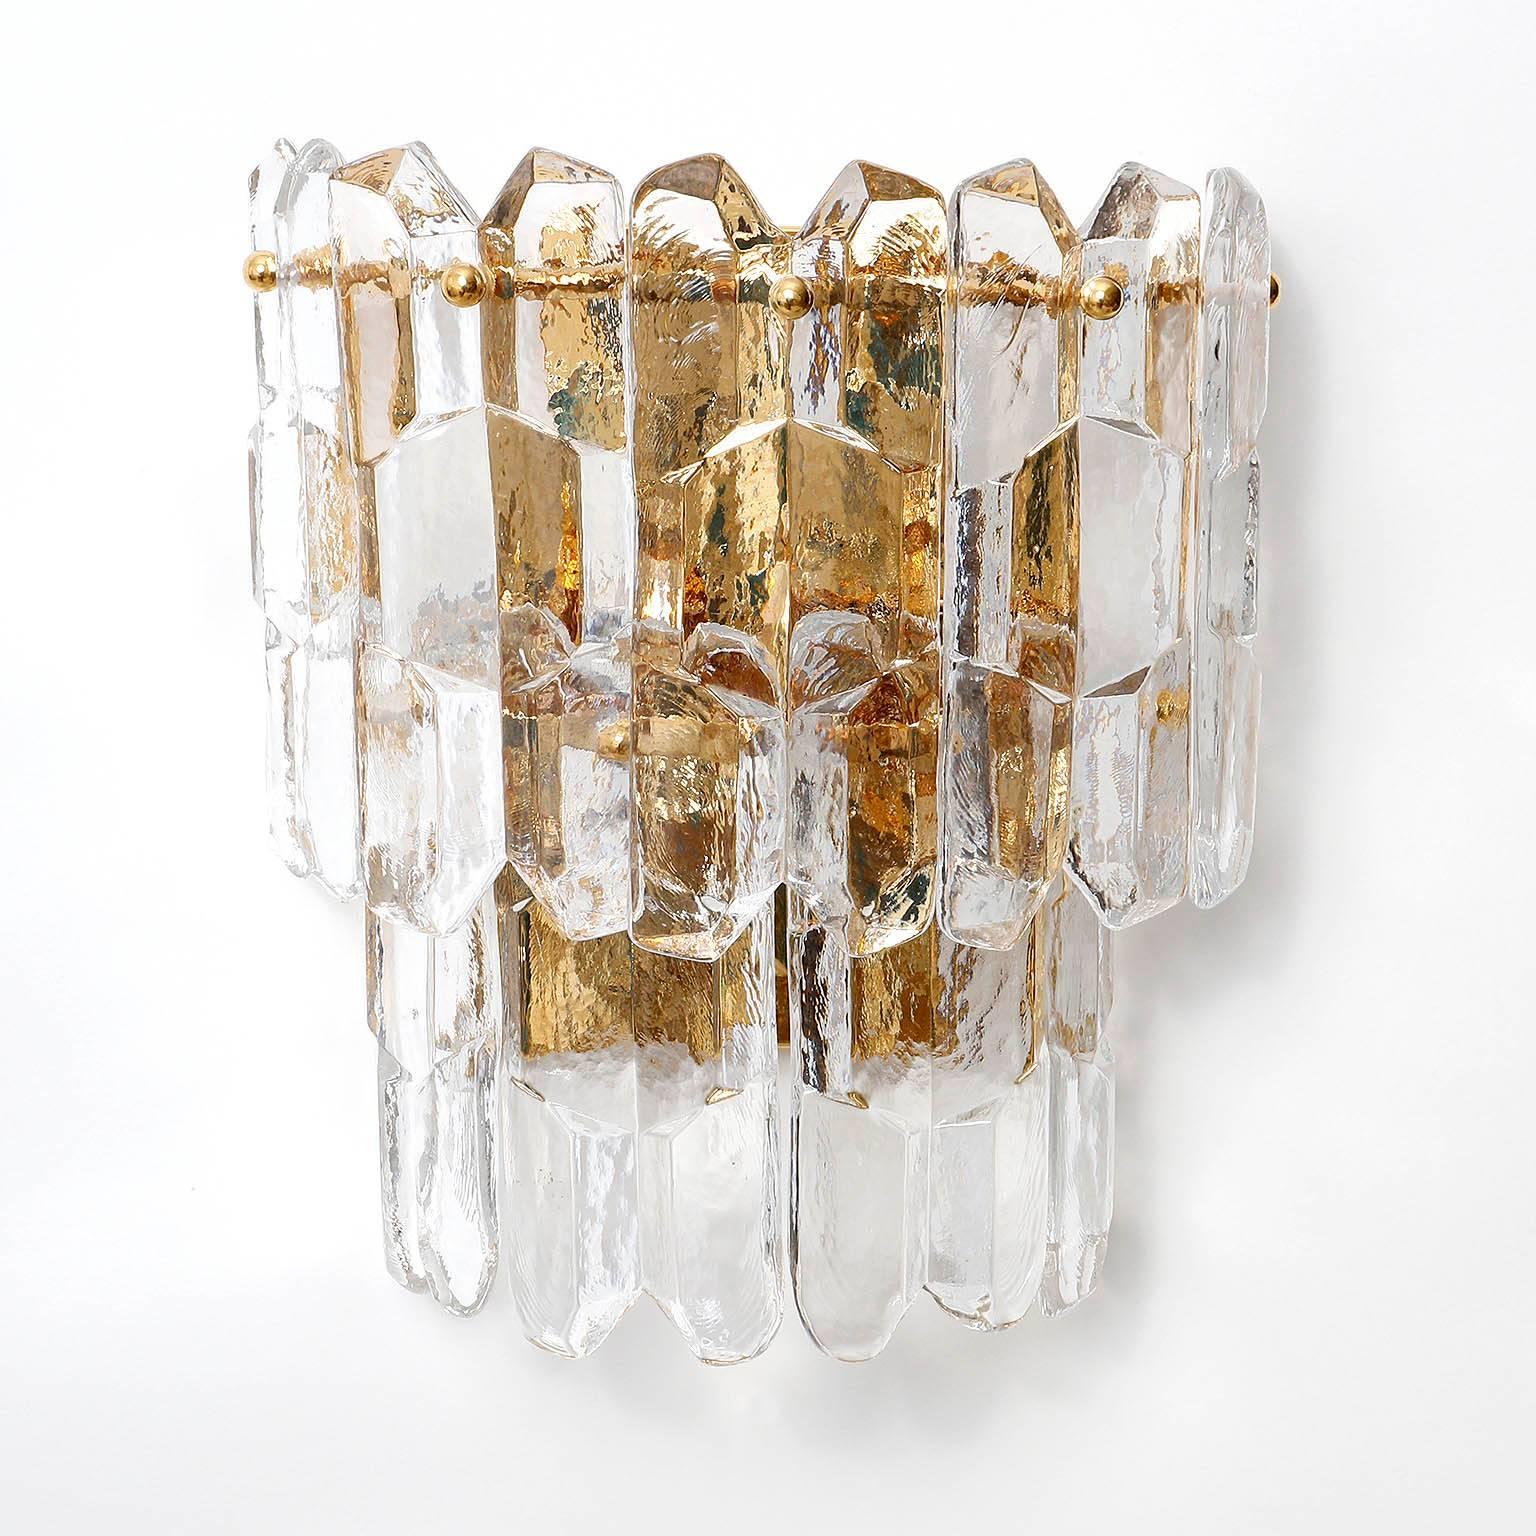 A pair of very exquisit 24-carat gold-plated brass and clear brillant glass 'Palazzo' wall lights by J.T. Kalmar, Vienna, Austria, manufactured in circa 1970 (late 1960s and early 1970s). 
These large hollywood regency lamps are handmade and high